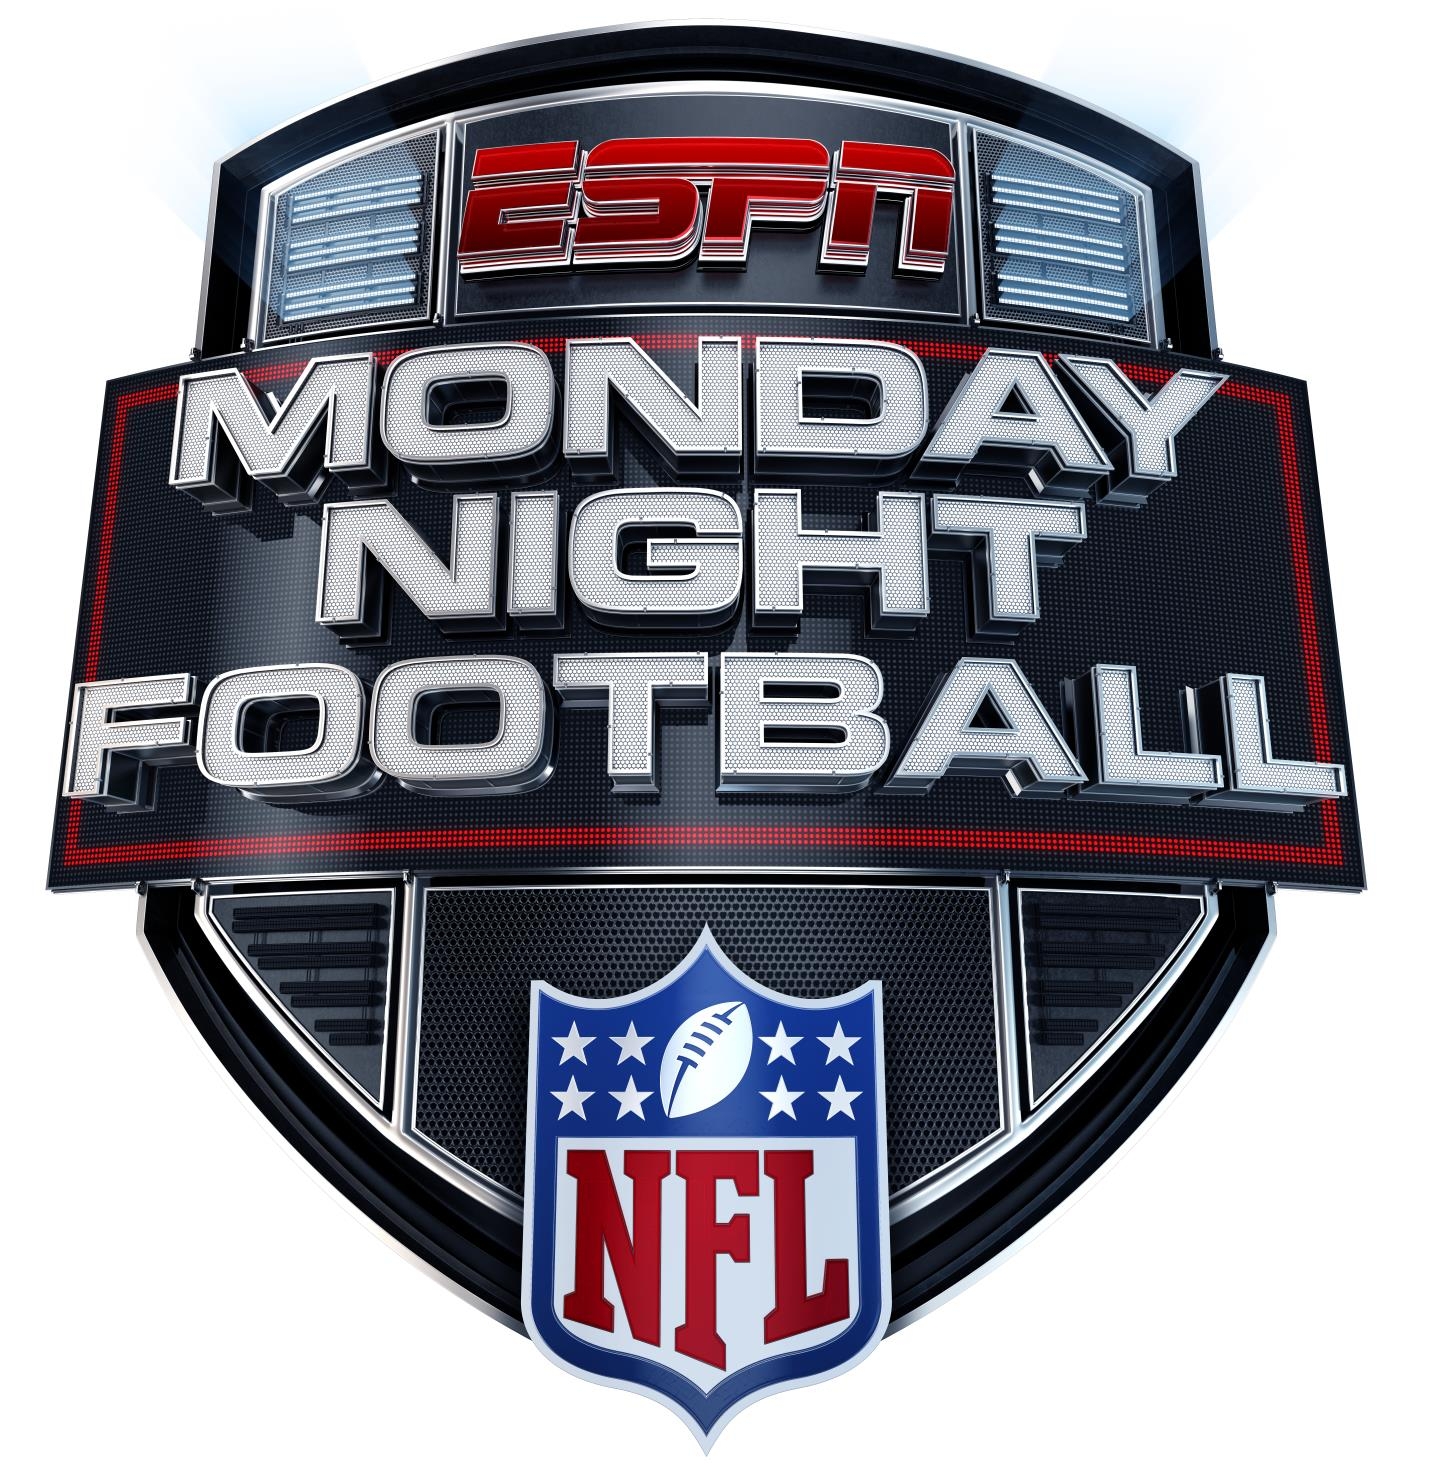 ESPN to unveil new MNF logo this fall - ESPN Front Row